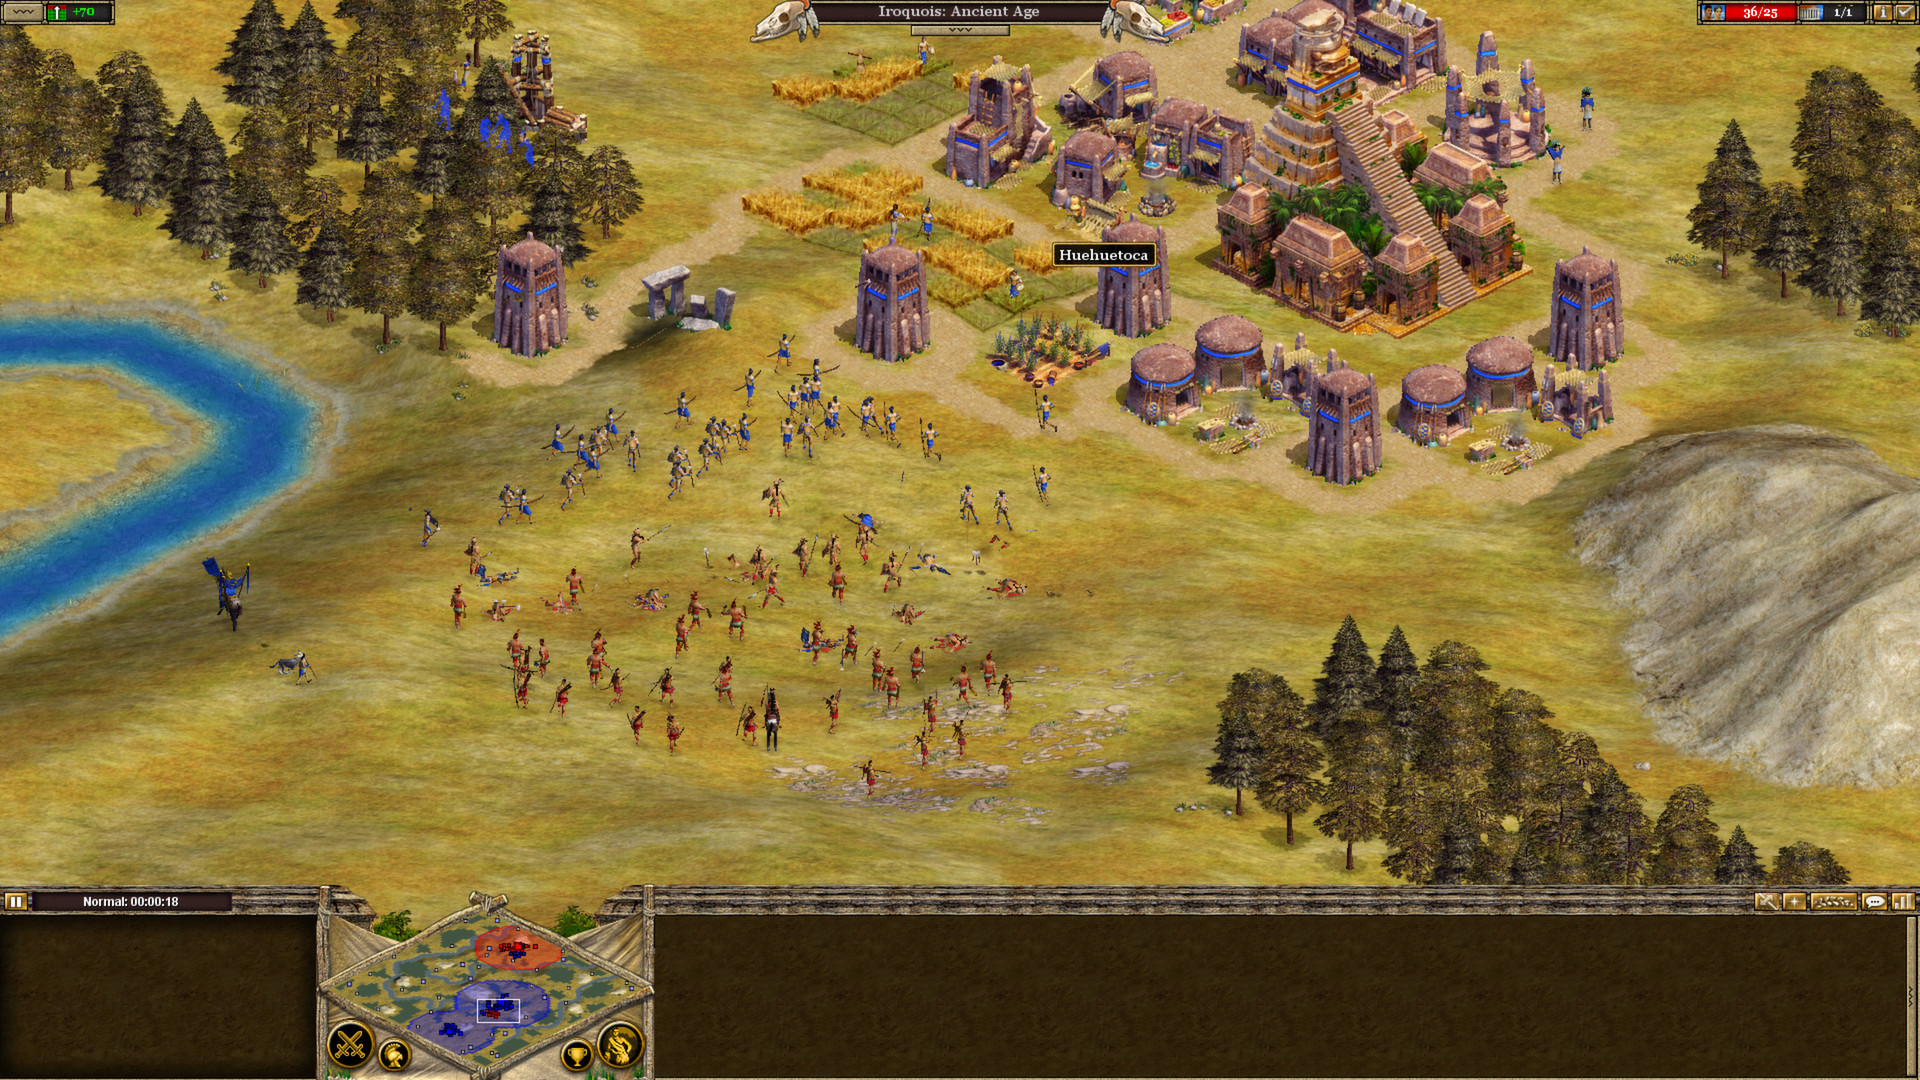 Desktop Wallpapers Rise of Nations: Rise of Legends vdeo game